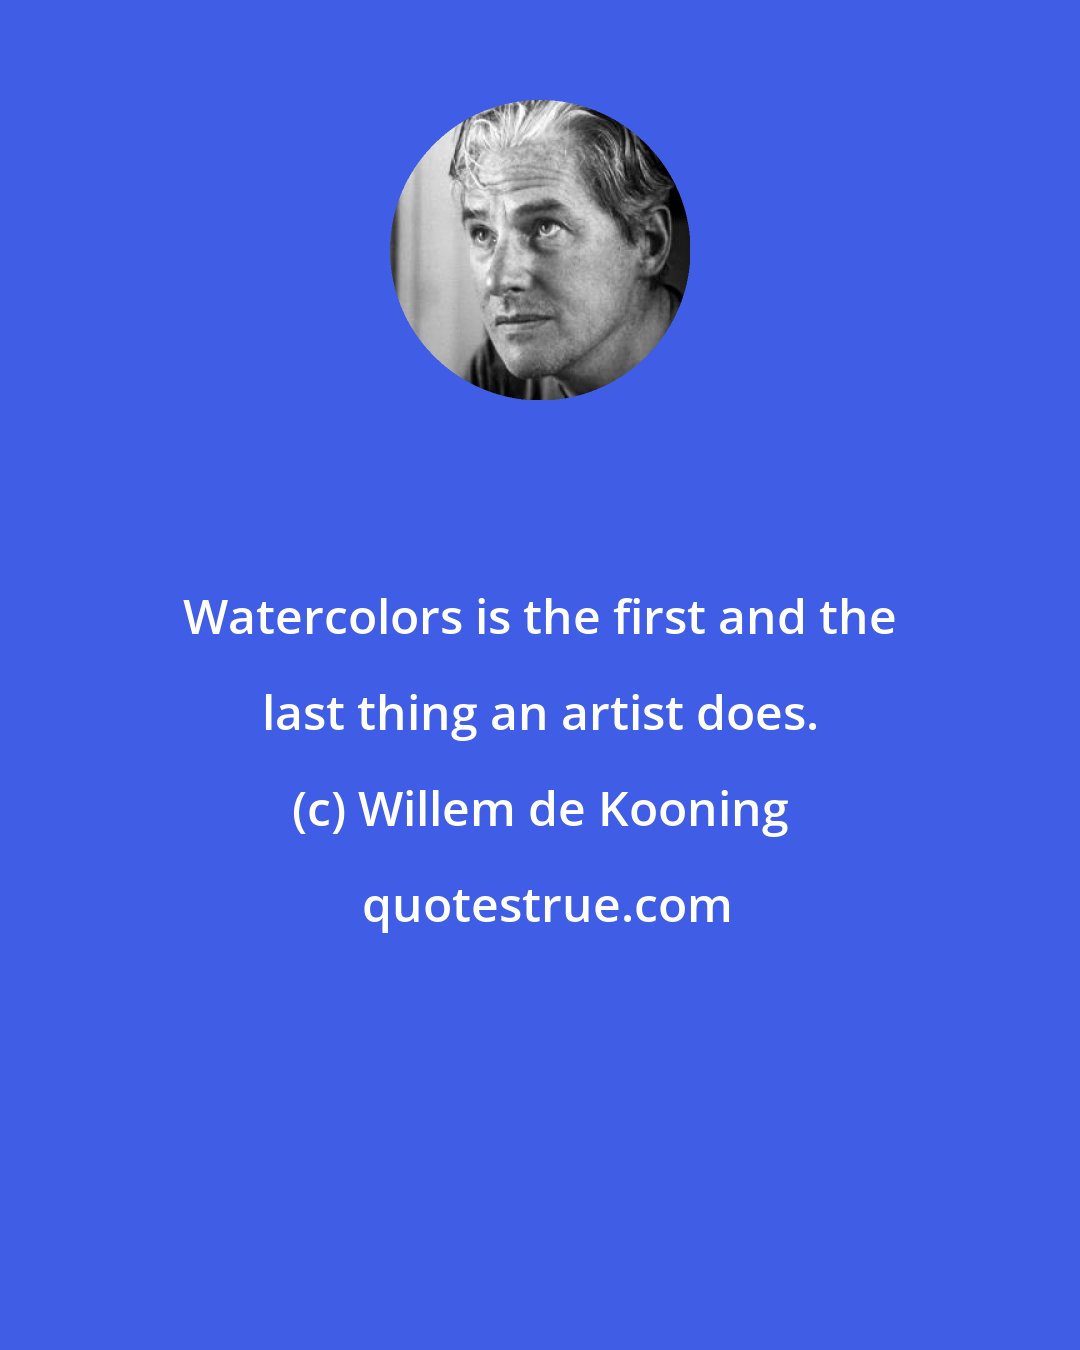 Willem de Kooning: Watercolors is the first and the last thing an artist does.